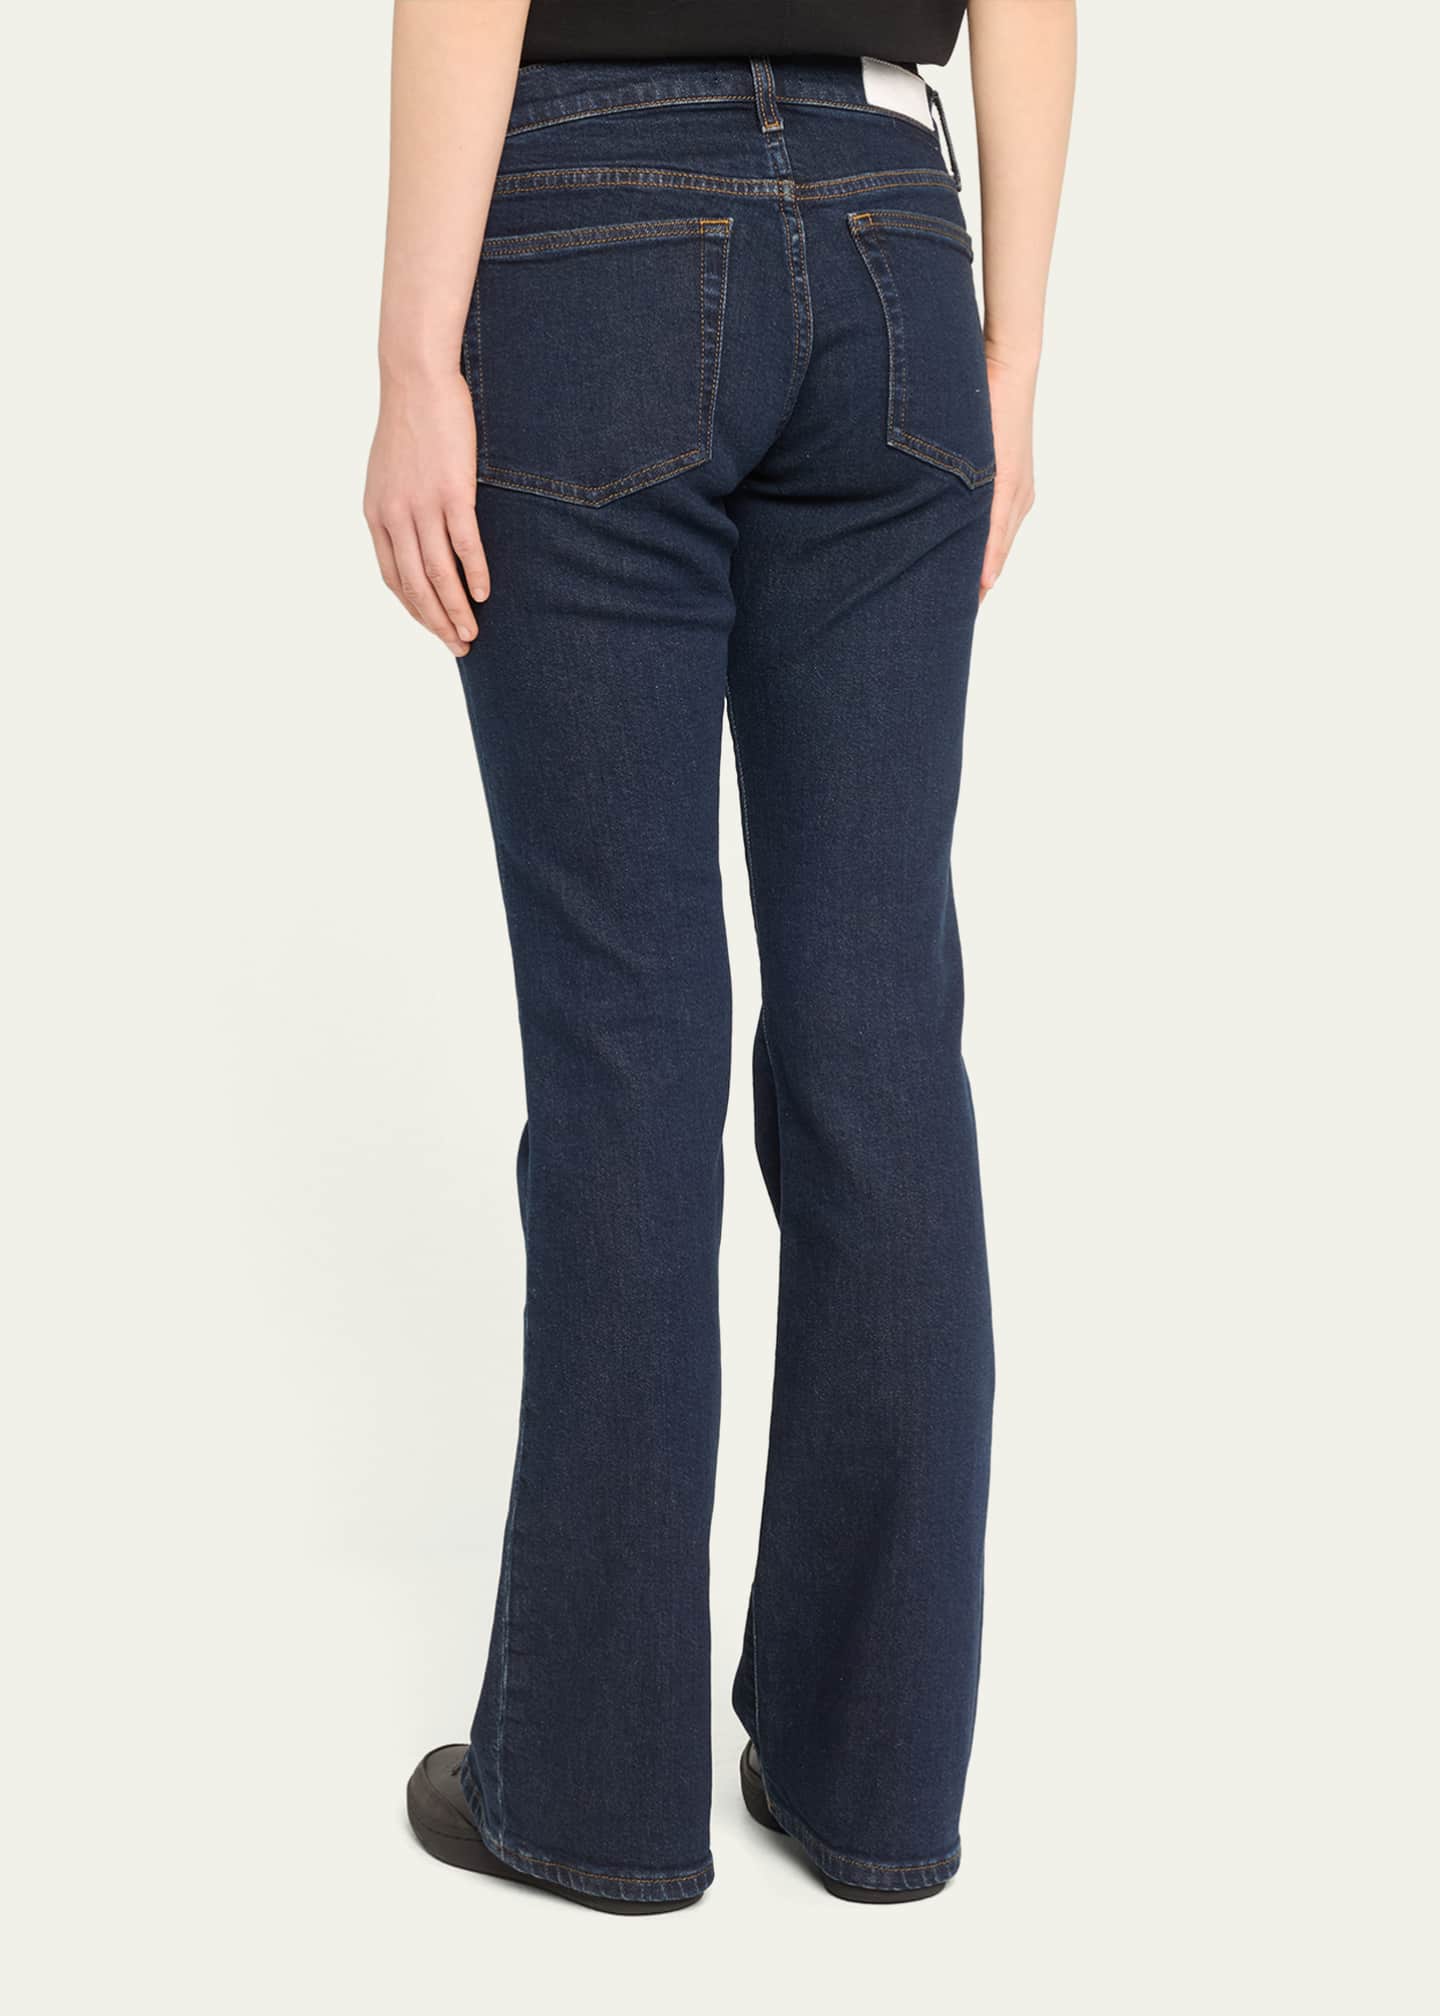 Goodman - Bergdorf Mid-Rise Jeans RE/DONE Bootcut Baby